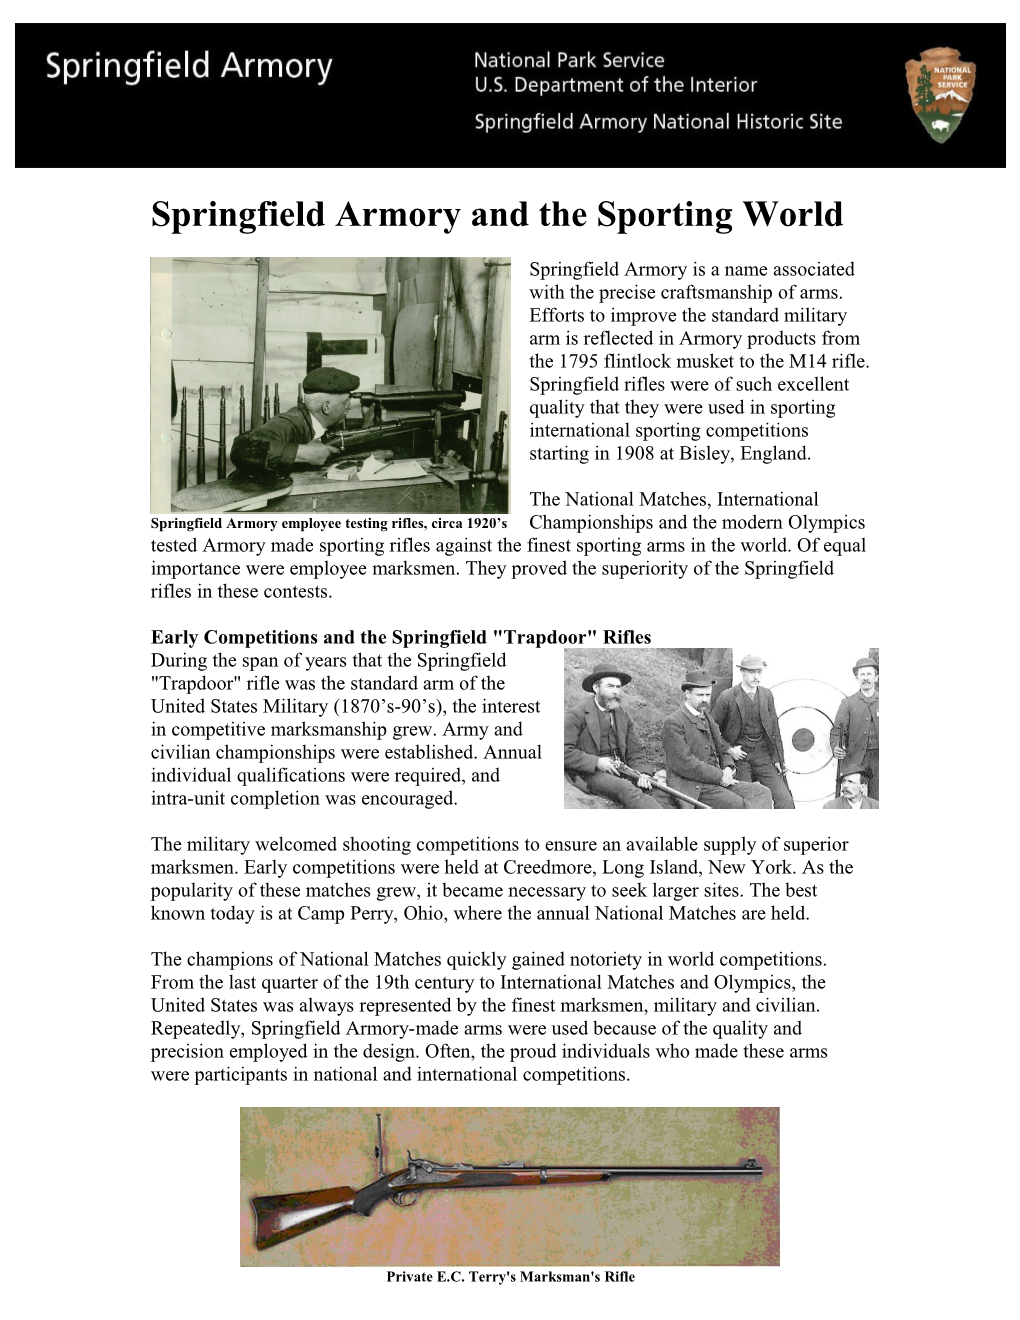 Springfield Armory and the Sporting World